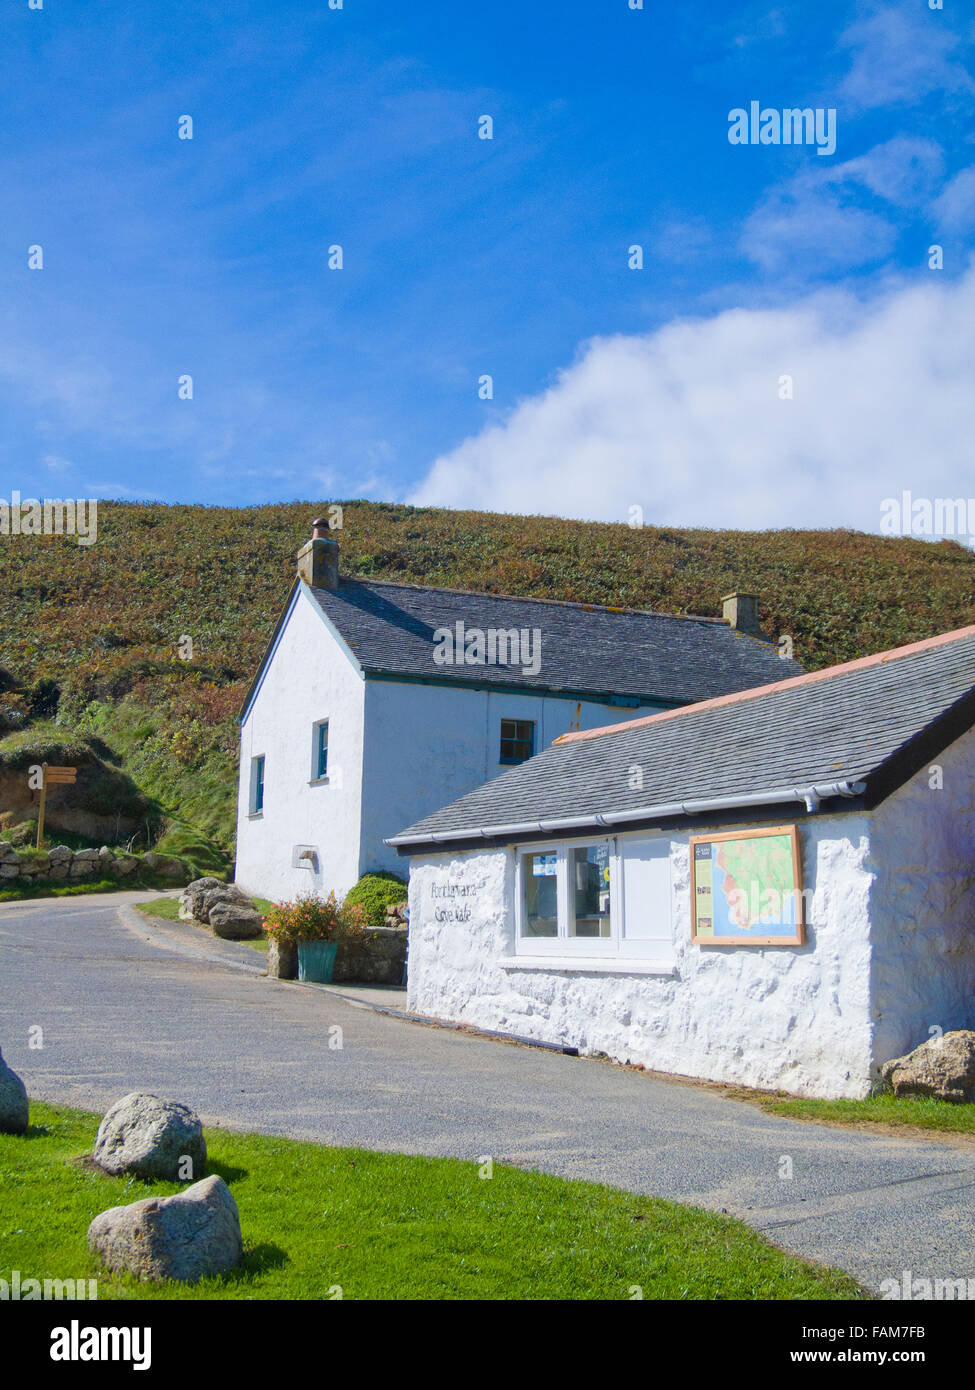 Porthgwarra Village Cove Cafe ( foreground building ), South West Cornwall, England, UK in Summer Stock Photo